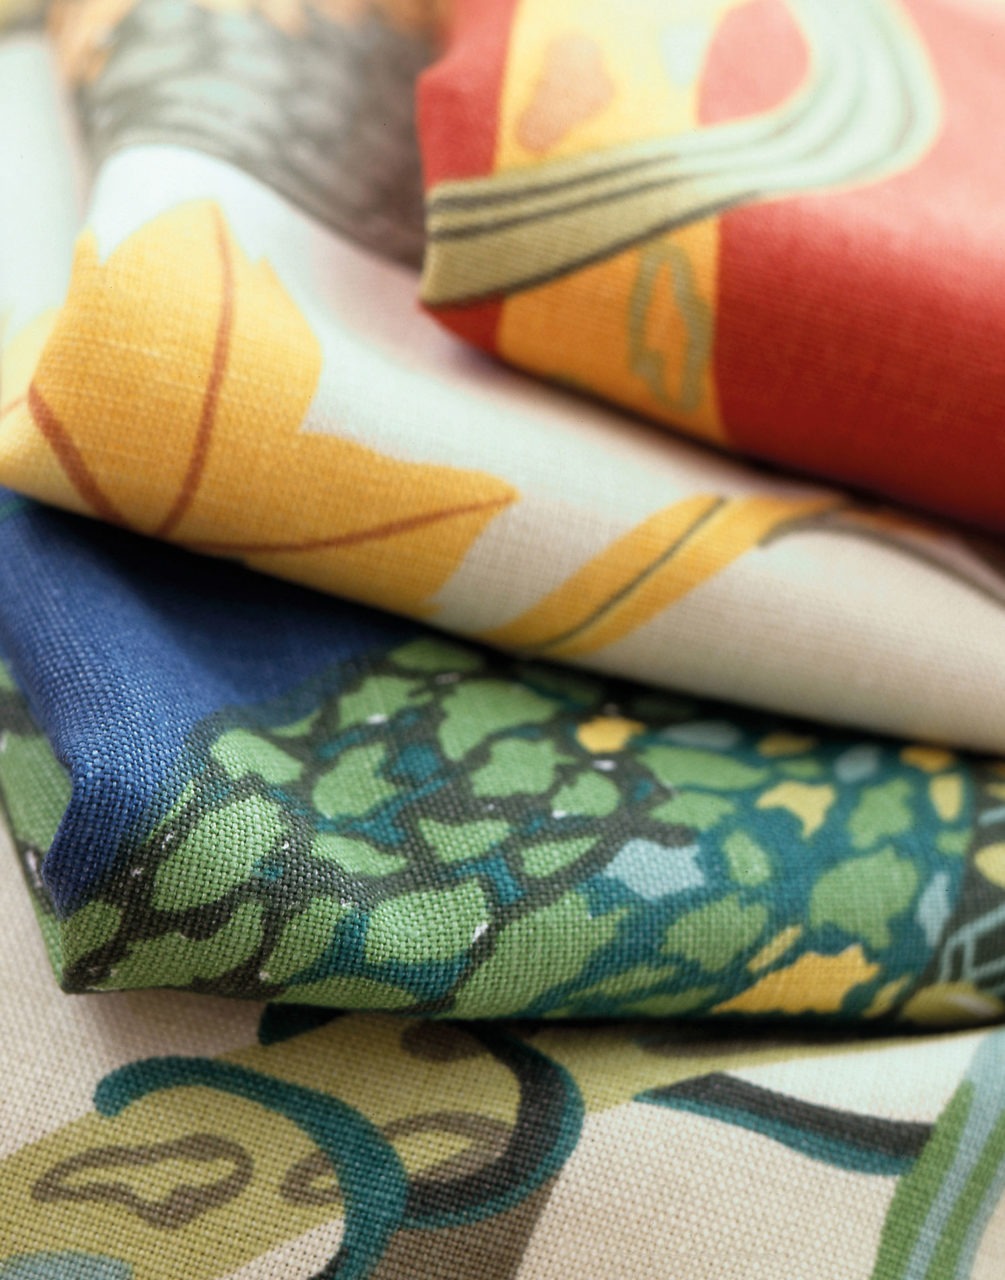 Stacked textiles in bold multi-coloured patterns.